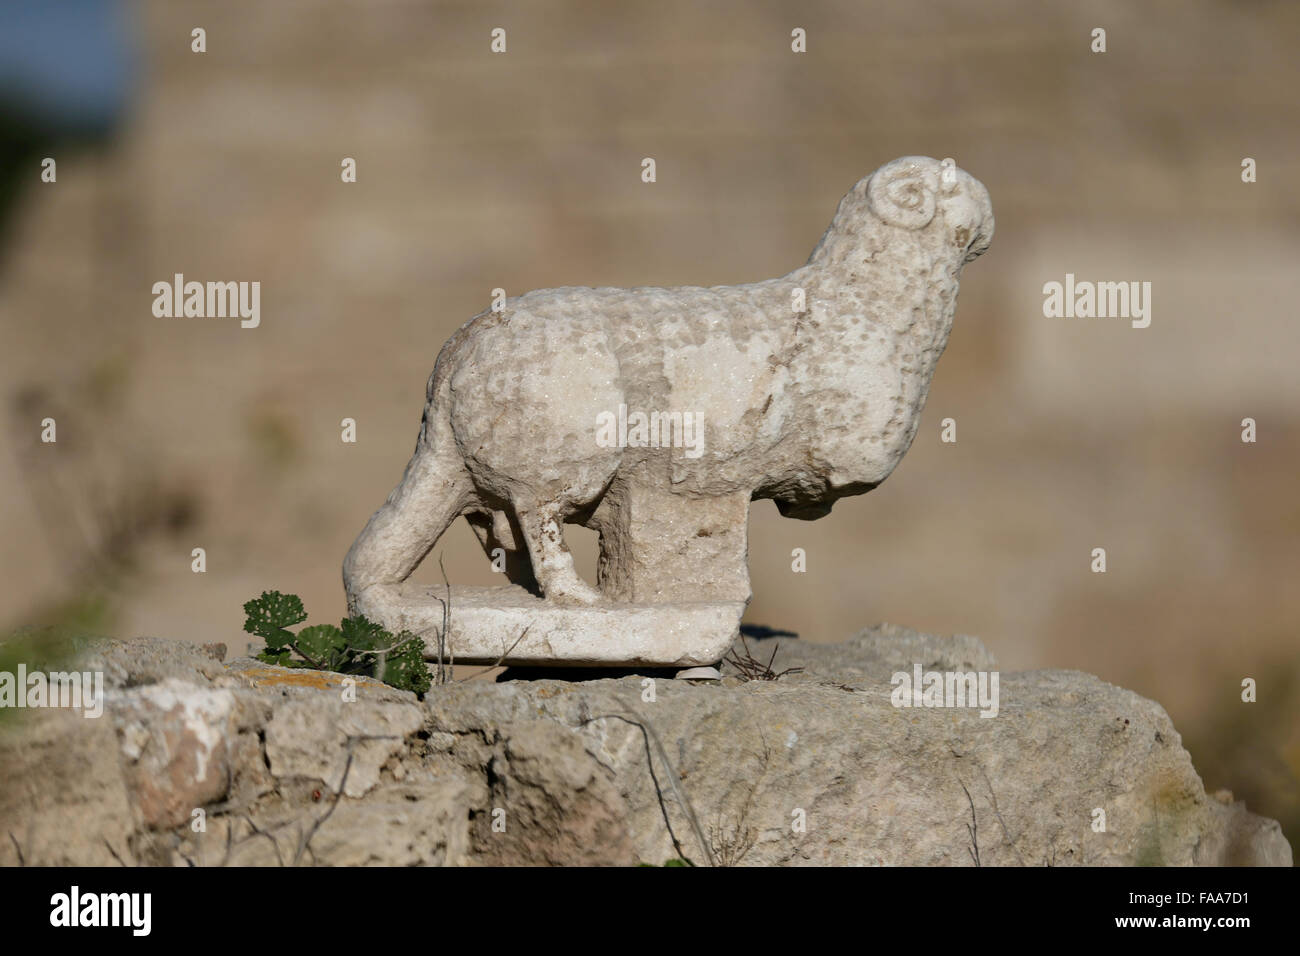 Jerusalem. 24th Dec, 2015. Photo taken on Dec. 24, 2015 shows a Byzantine-era marble sculpture of a lamb unearthed in Israel. Archaeologists on Thusday unearthed a Byzantine-era marble sculpture of a lamb near the Ancient Caesarea Church in the Caesarea National Park, in northern Israel. Experts believe that the lamb served as part of the decoration in the 6th-7th century CE church that was discovered adjacent to the ancient port. Credit:  JINIPIX/Nimrod Glikman/Xinhua/Alamy Live News Stock Photo